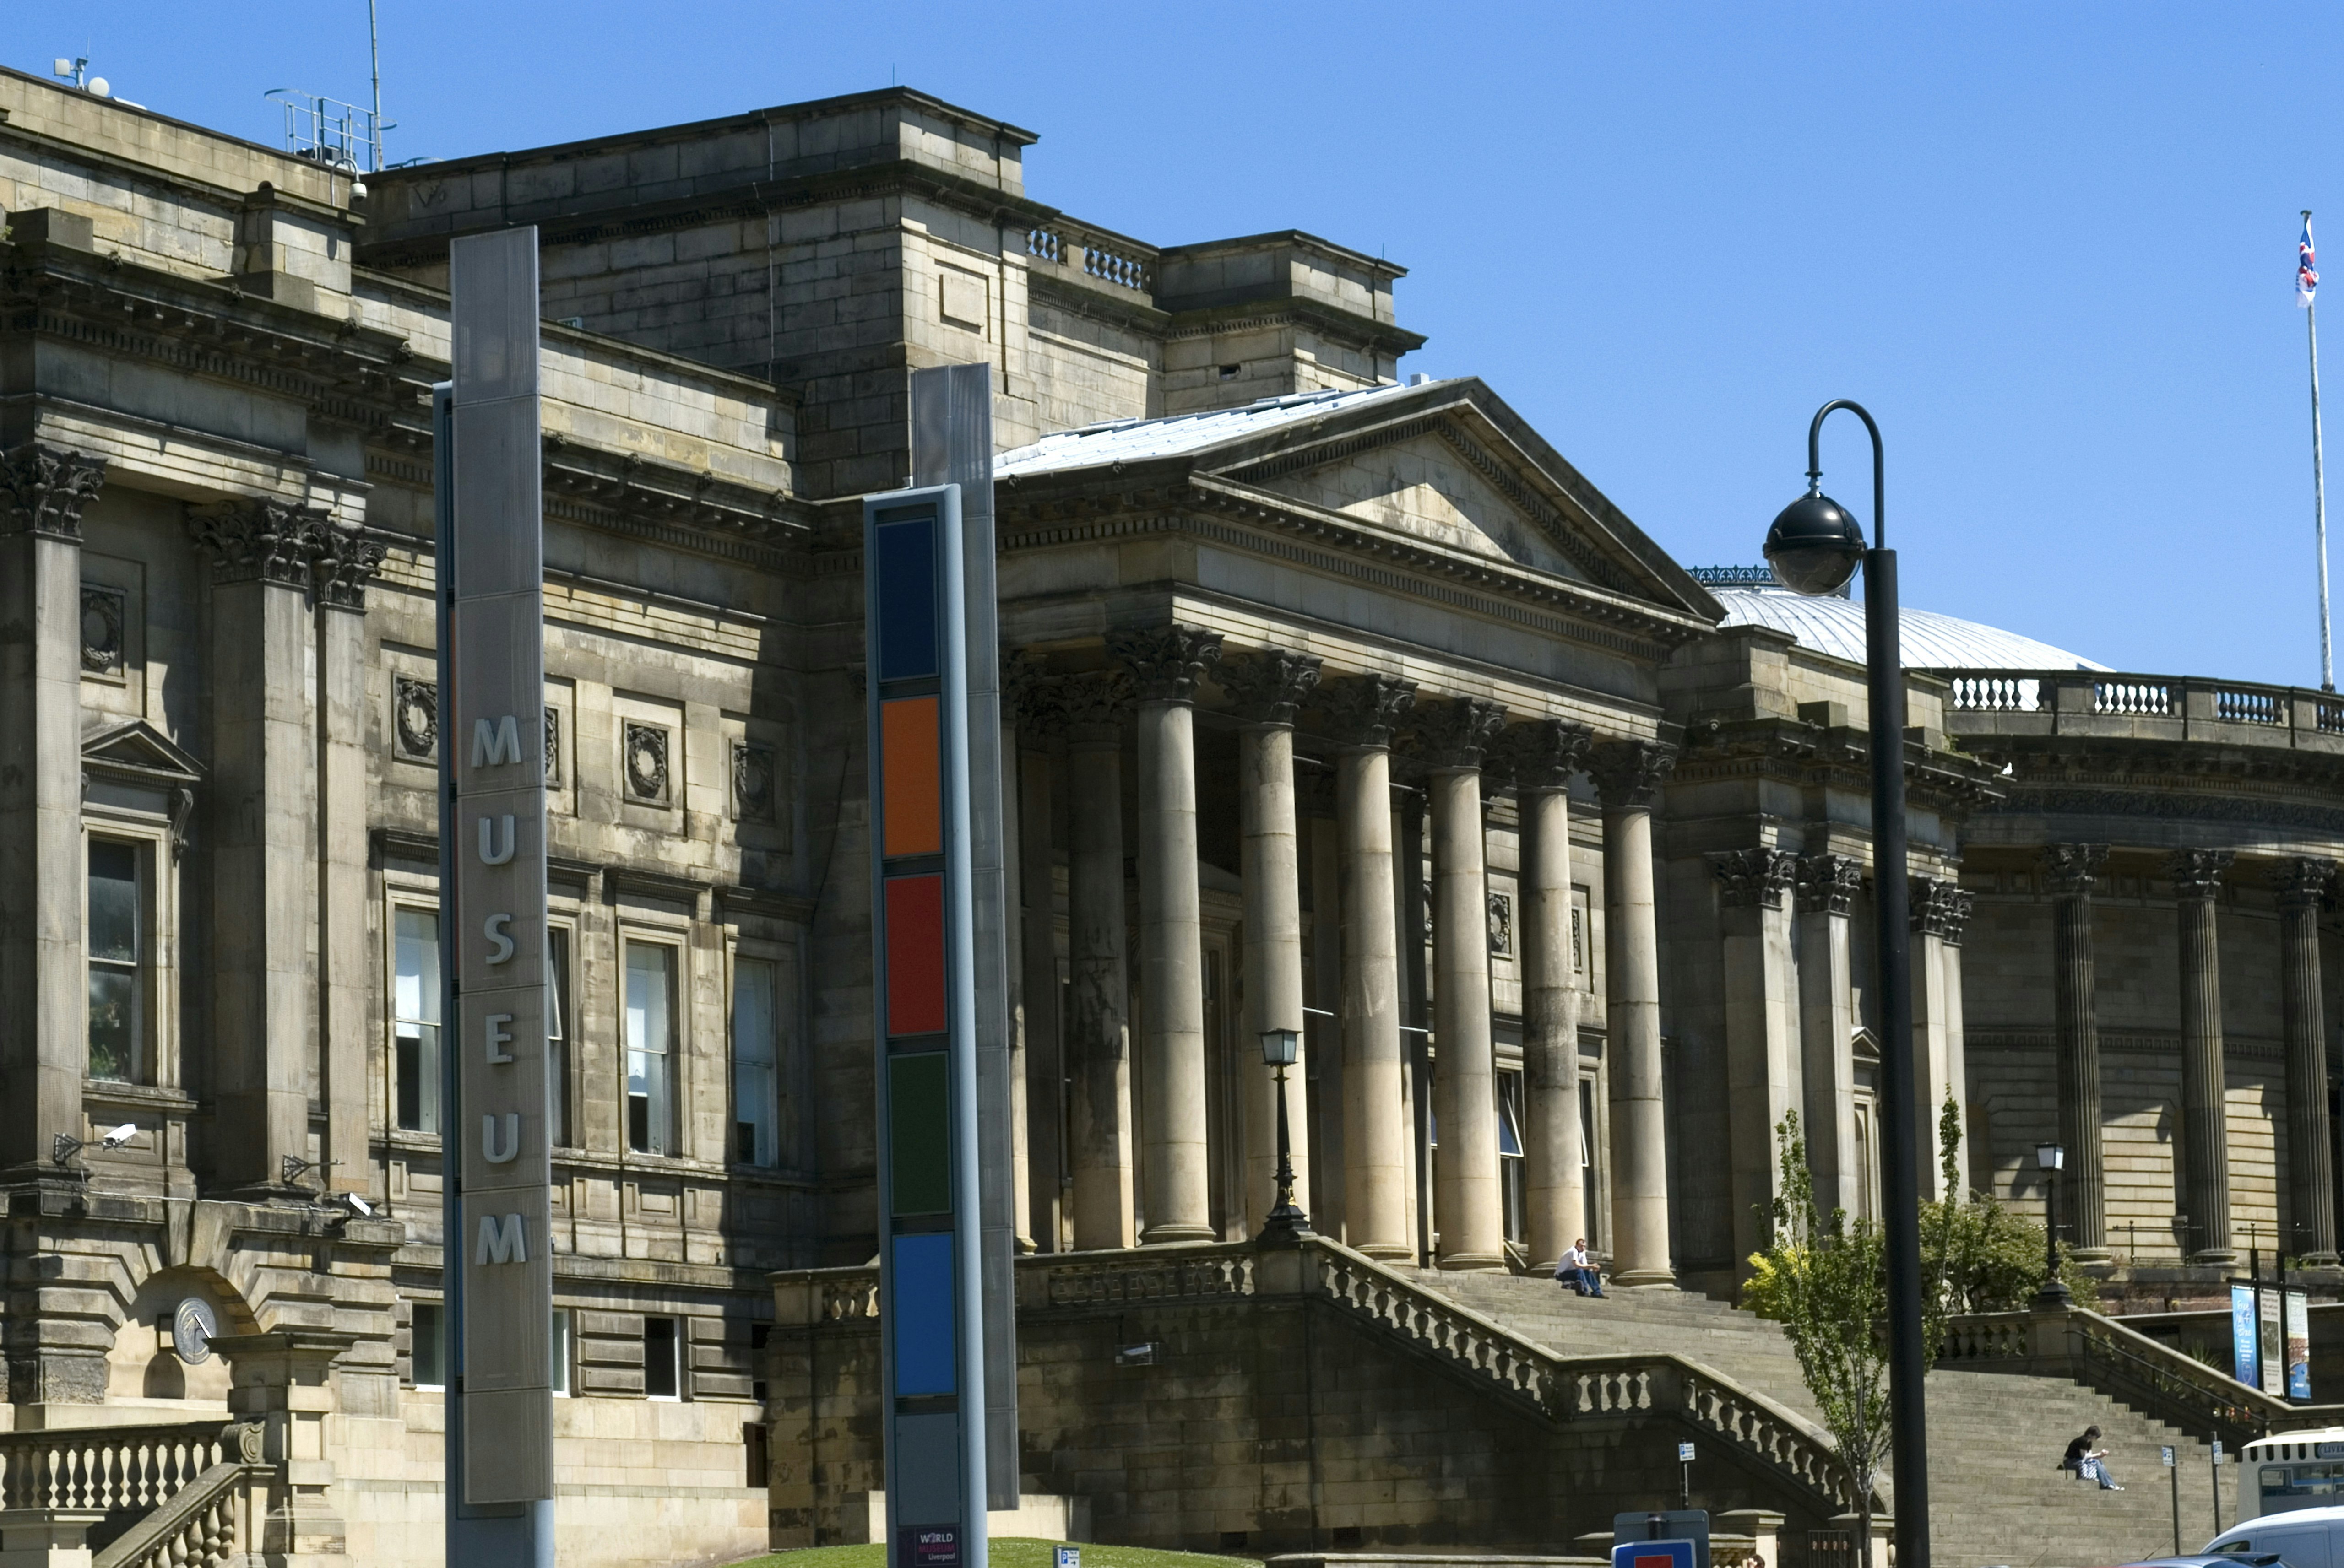 The World Museum, part of Liverpool's museum complex, Liverpool, Merseyside, England, United Kingdom, Europe